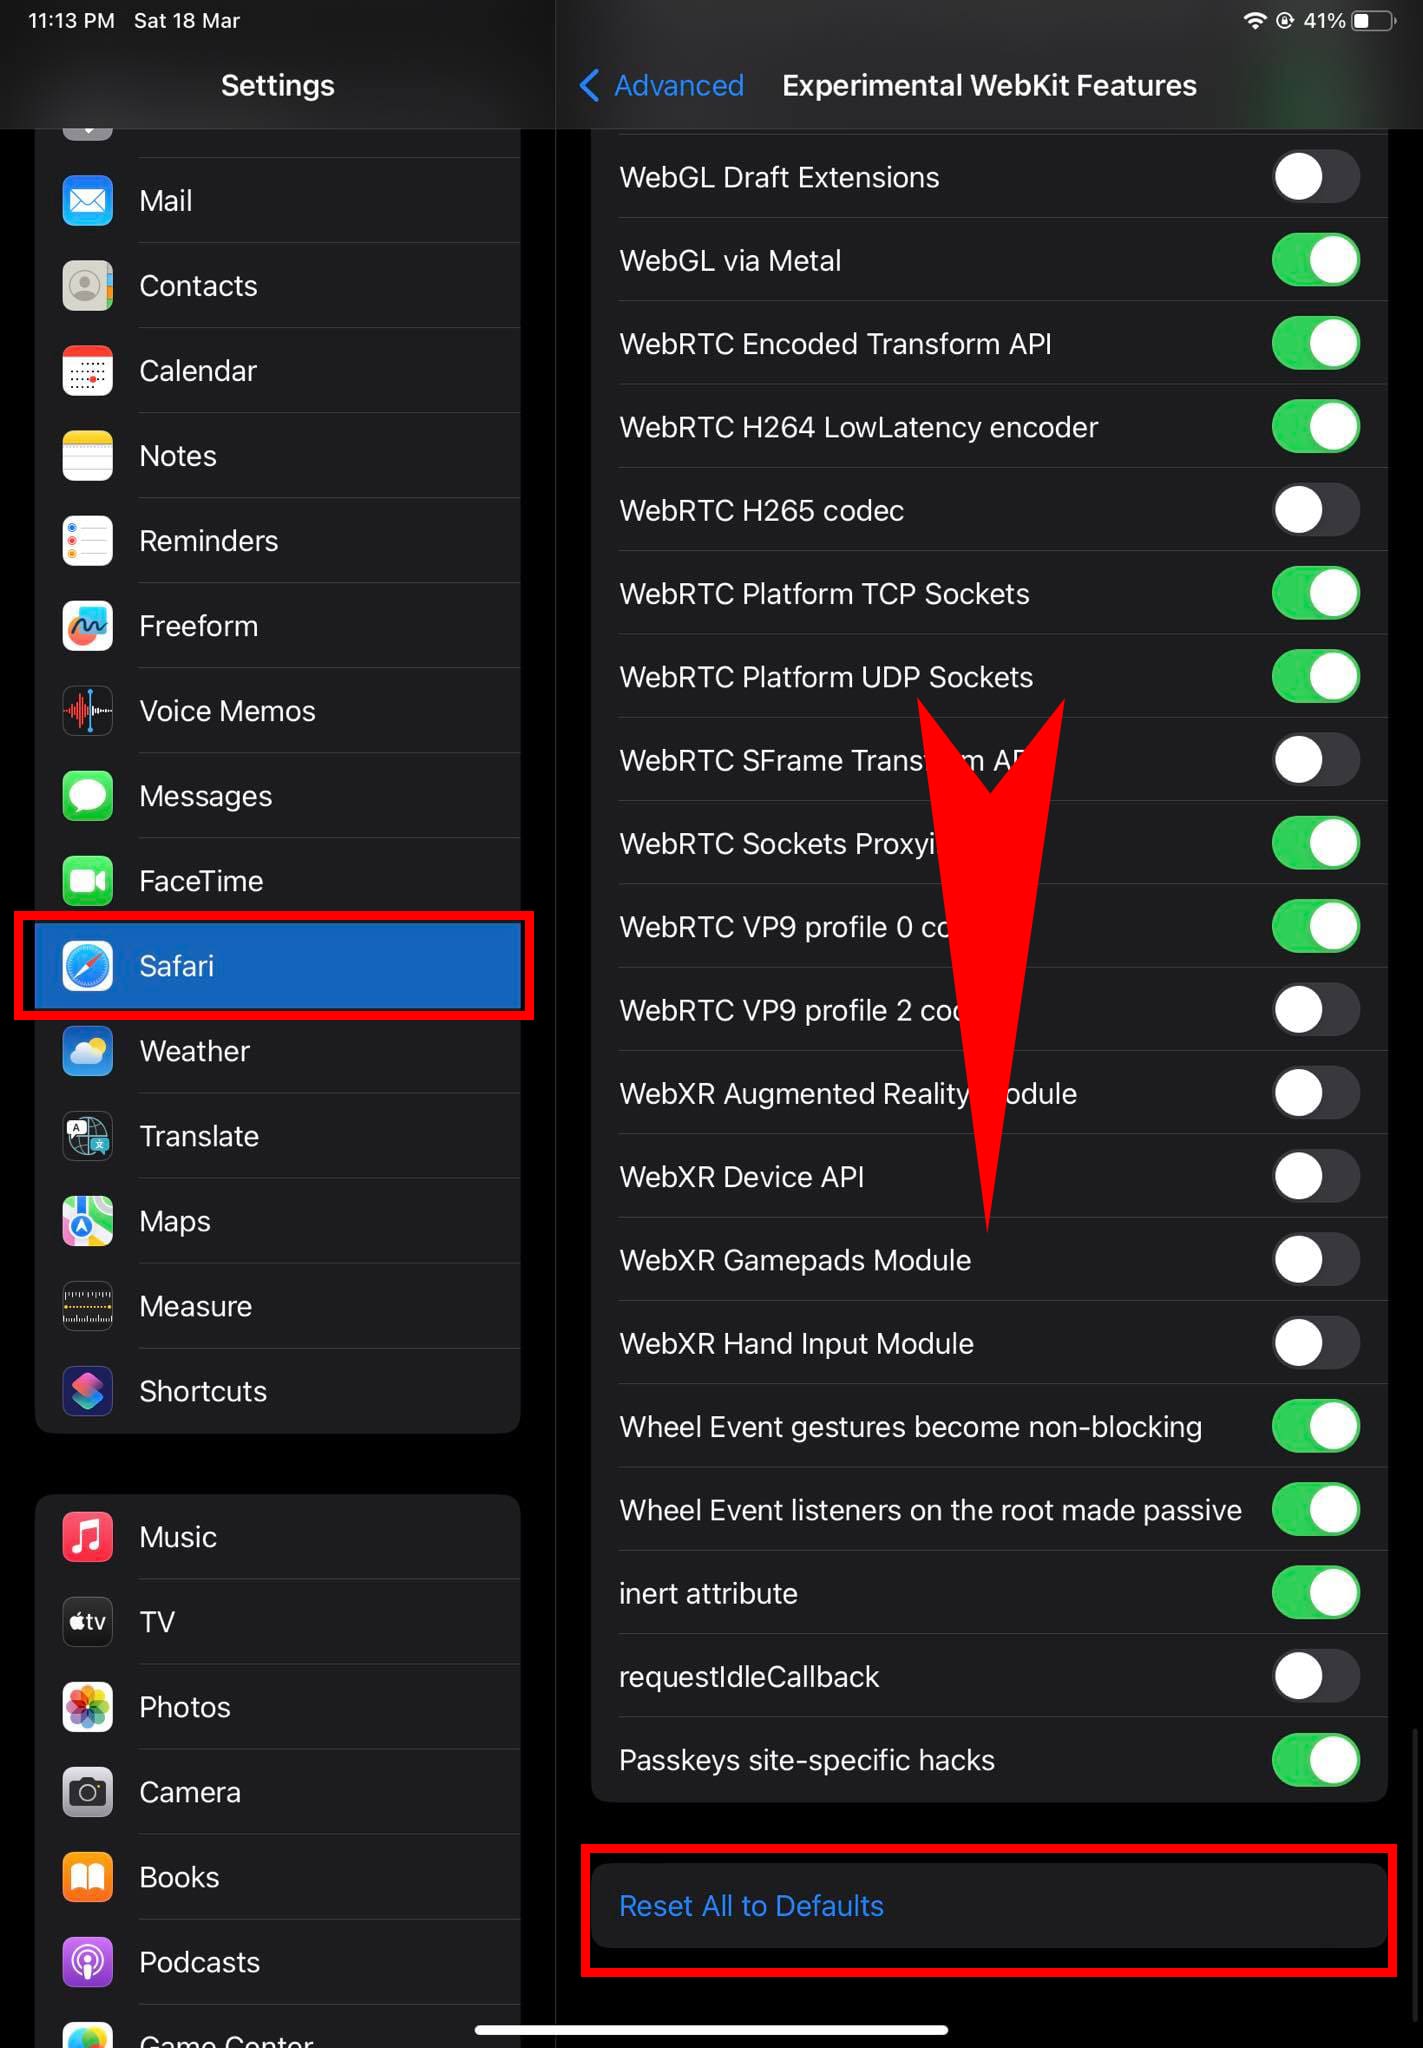 Reset to All Defaults in iOS